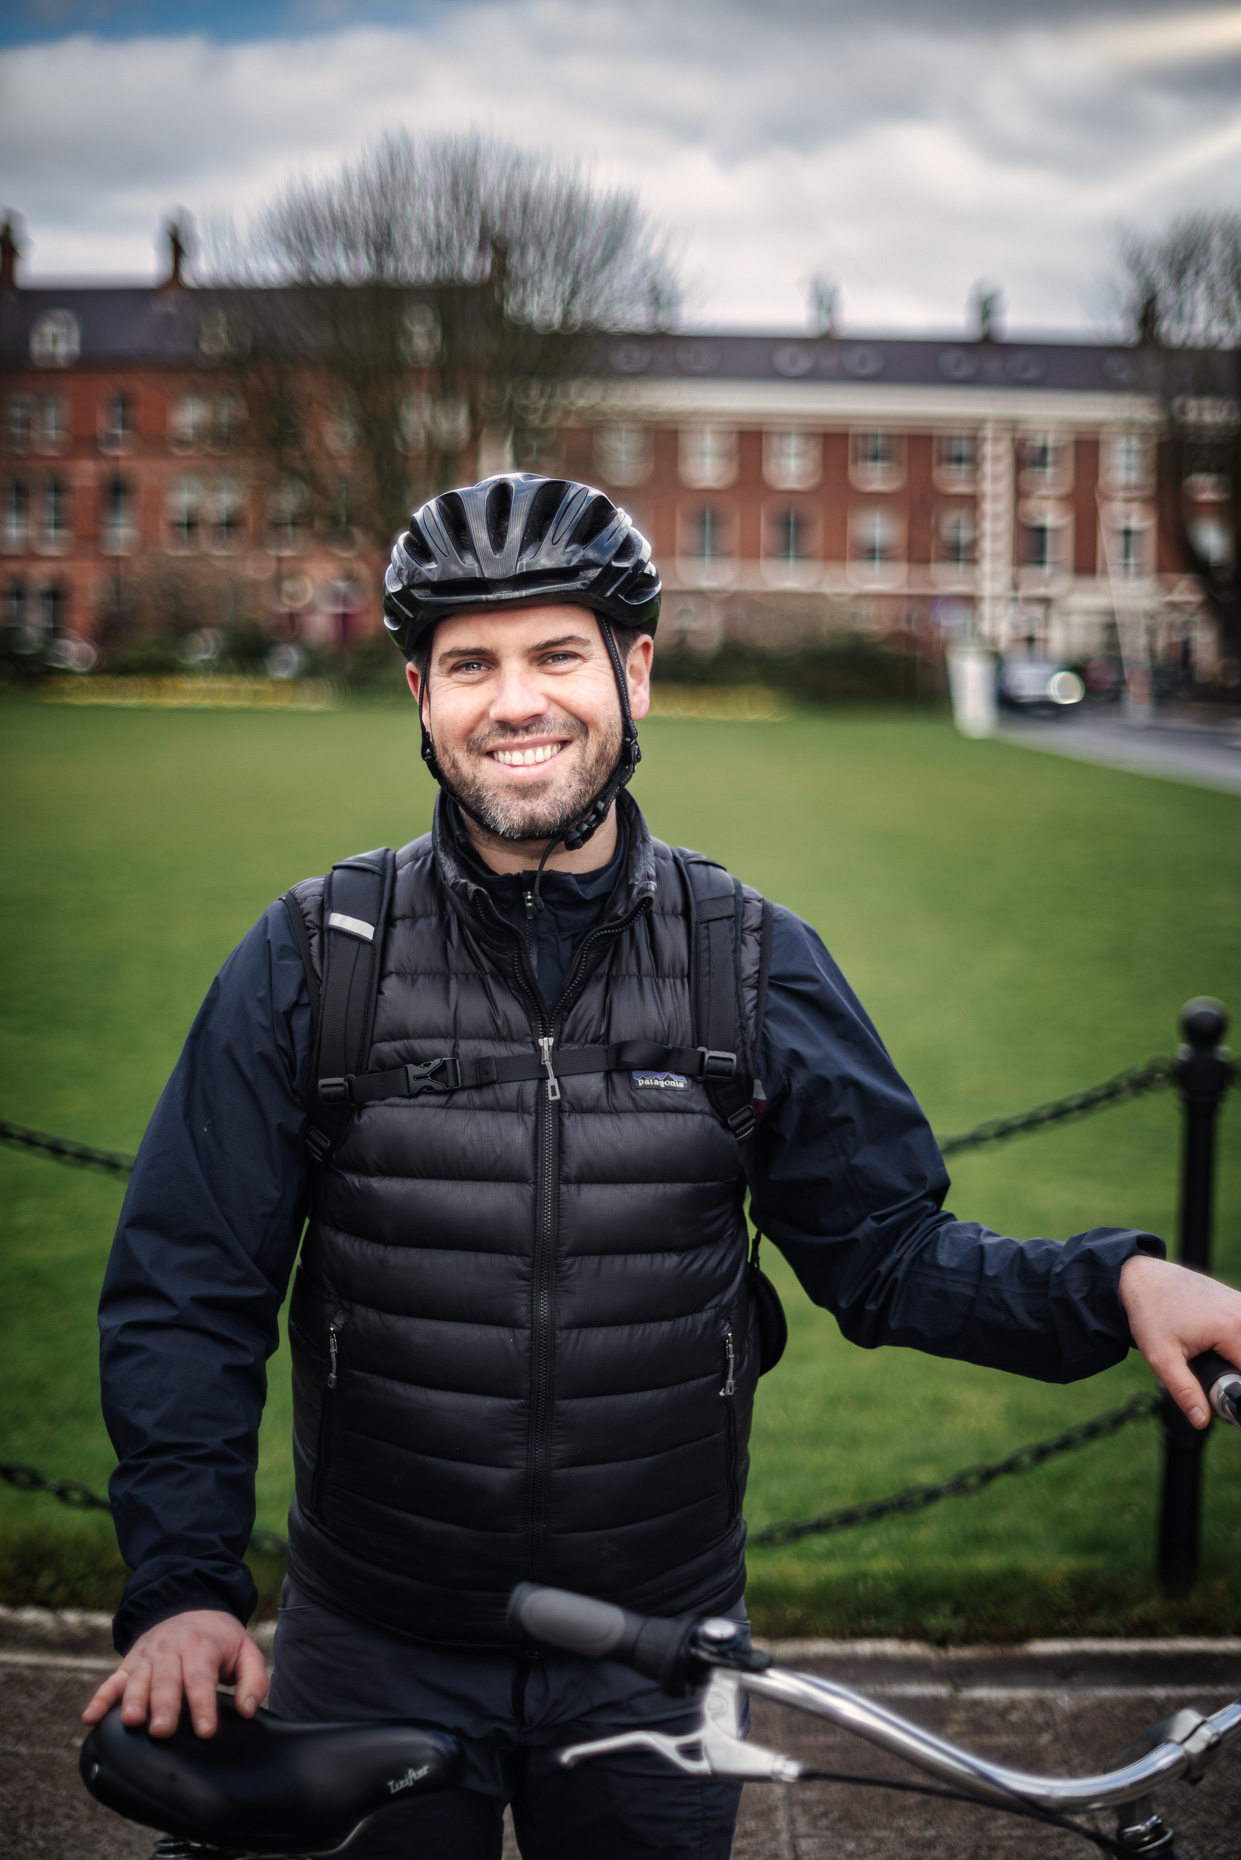 Touring around Belfast on a bicycle